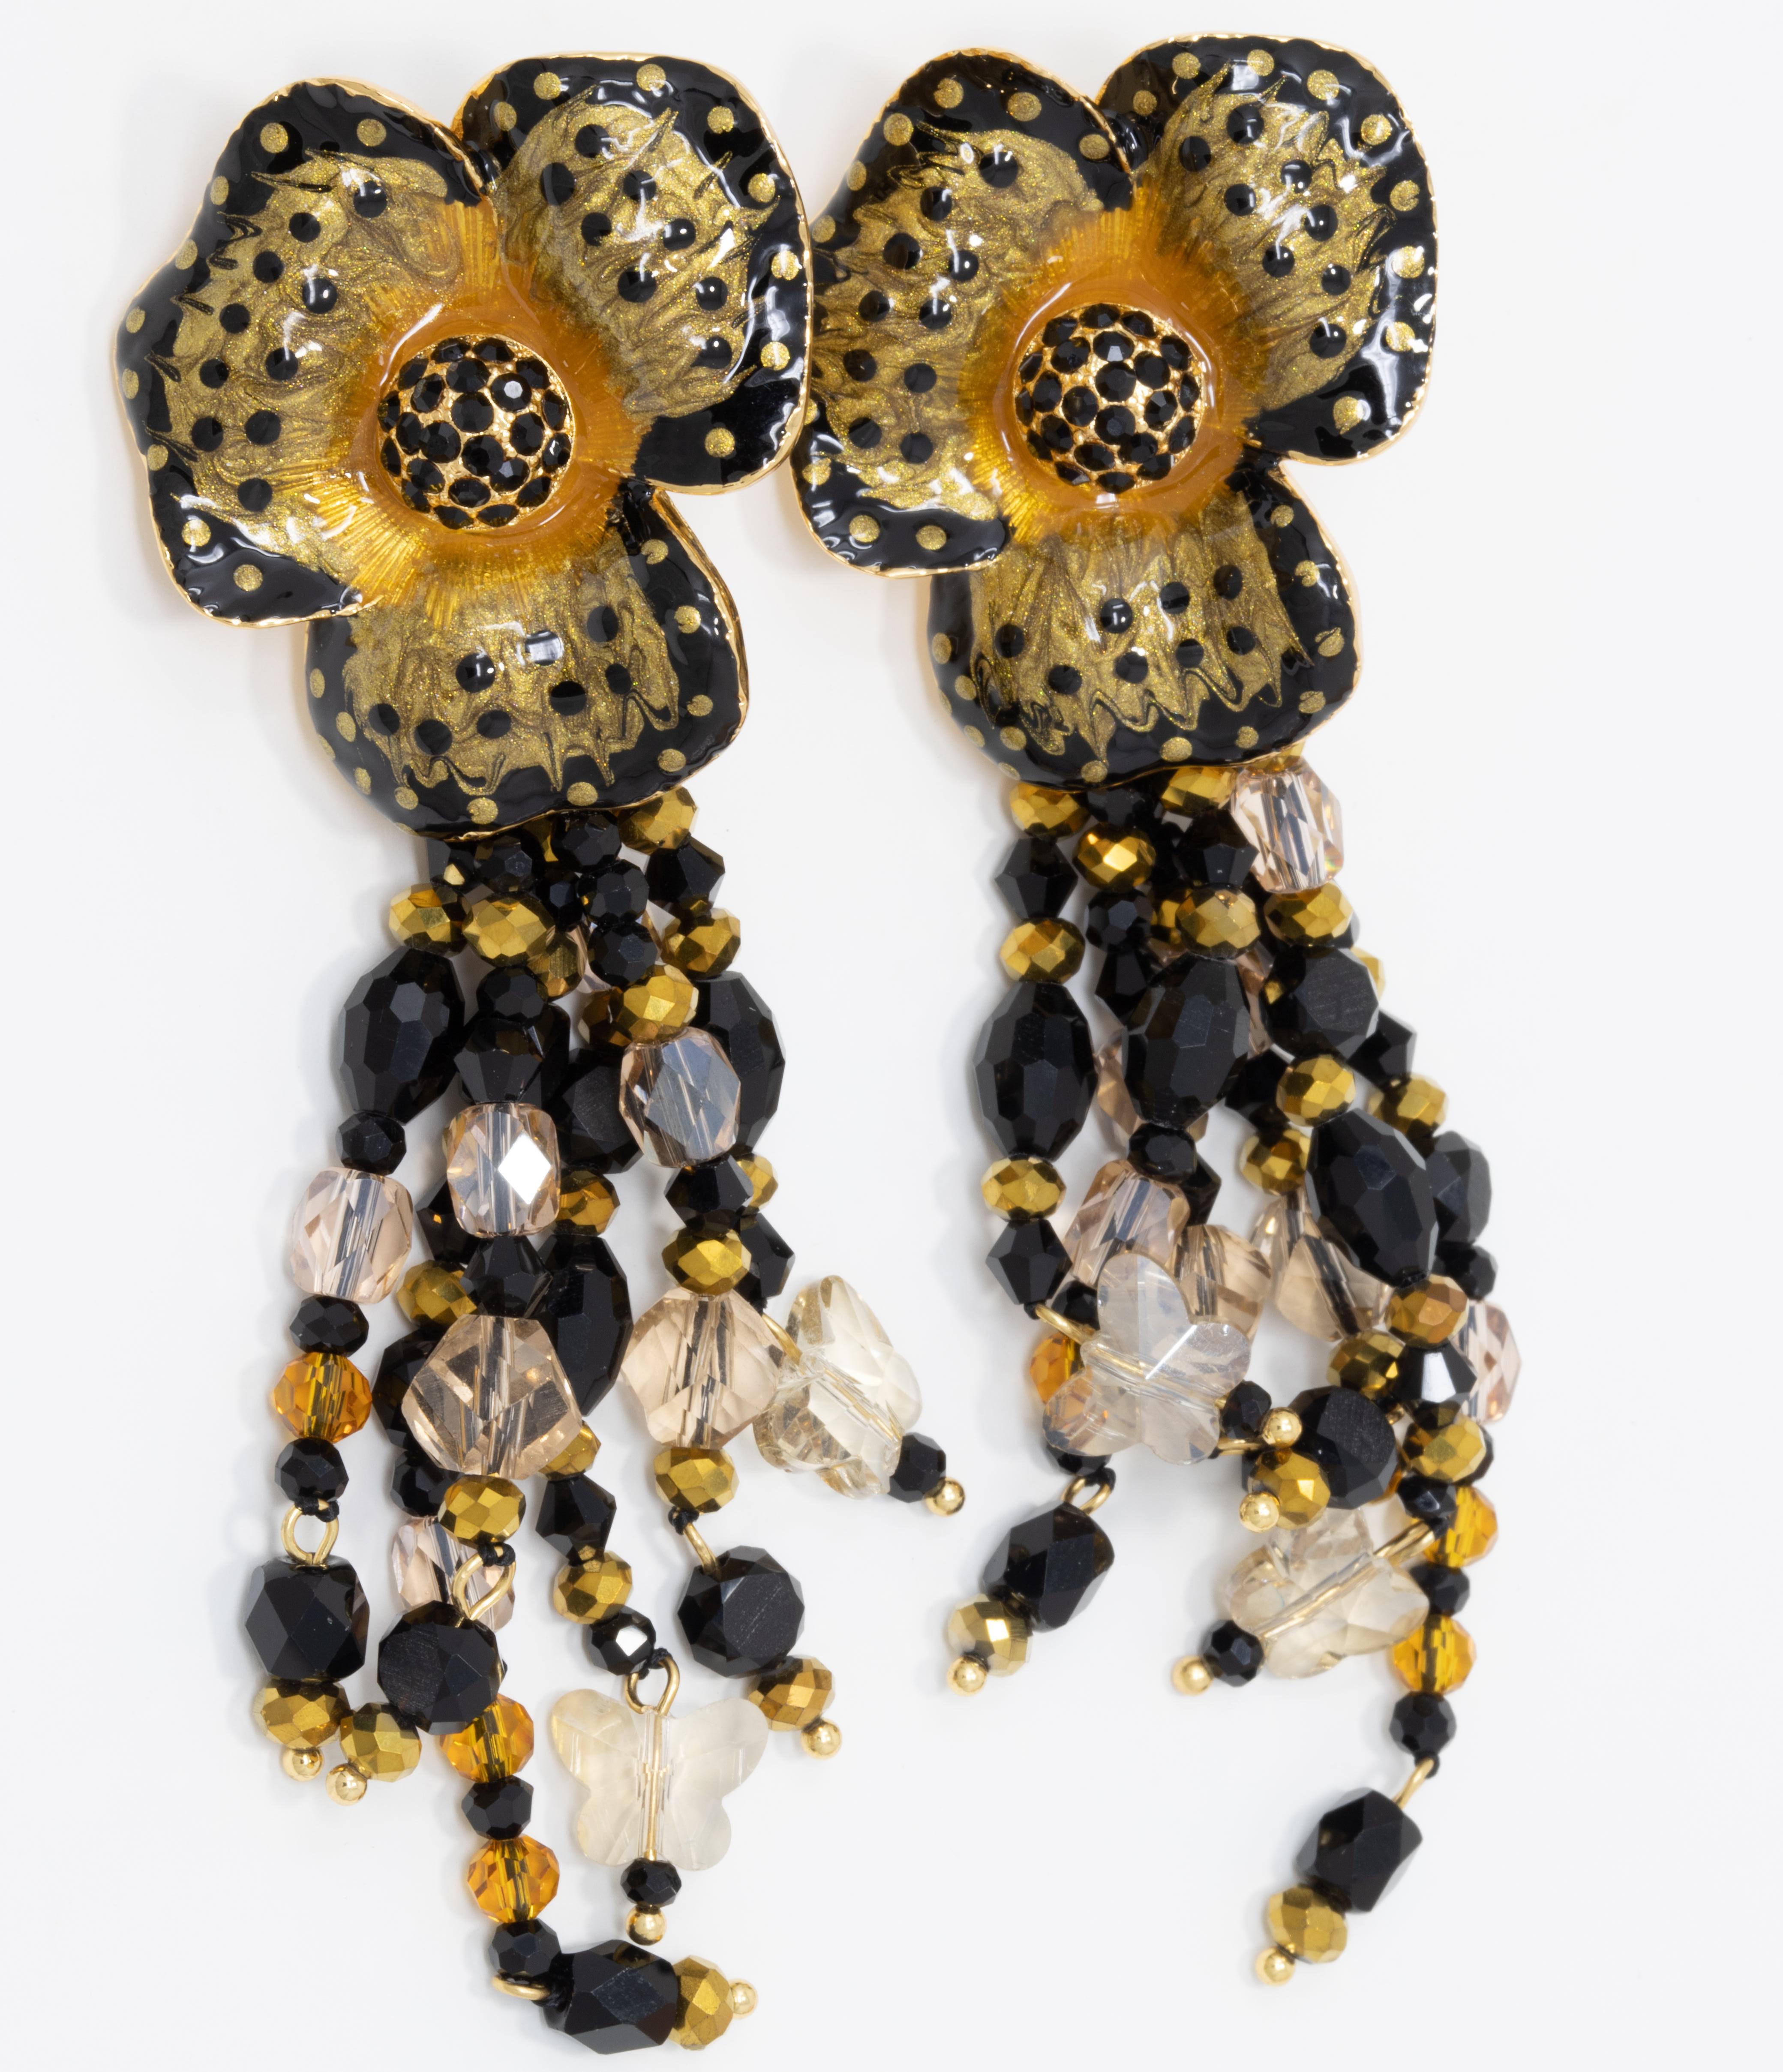 Flower power! A pair of ornate floral post-back earrings featuring dangle jet-black, topaz, and gold crystal strands. Painted with black and yellow enamel. Set on gold plated metal.

Hallmarks: Jay, Jay Strongwater, CN

By Jay Strongwater,